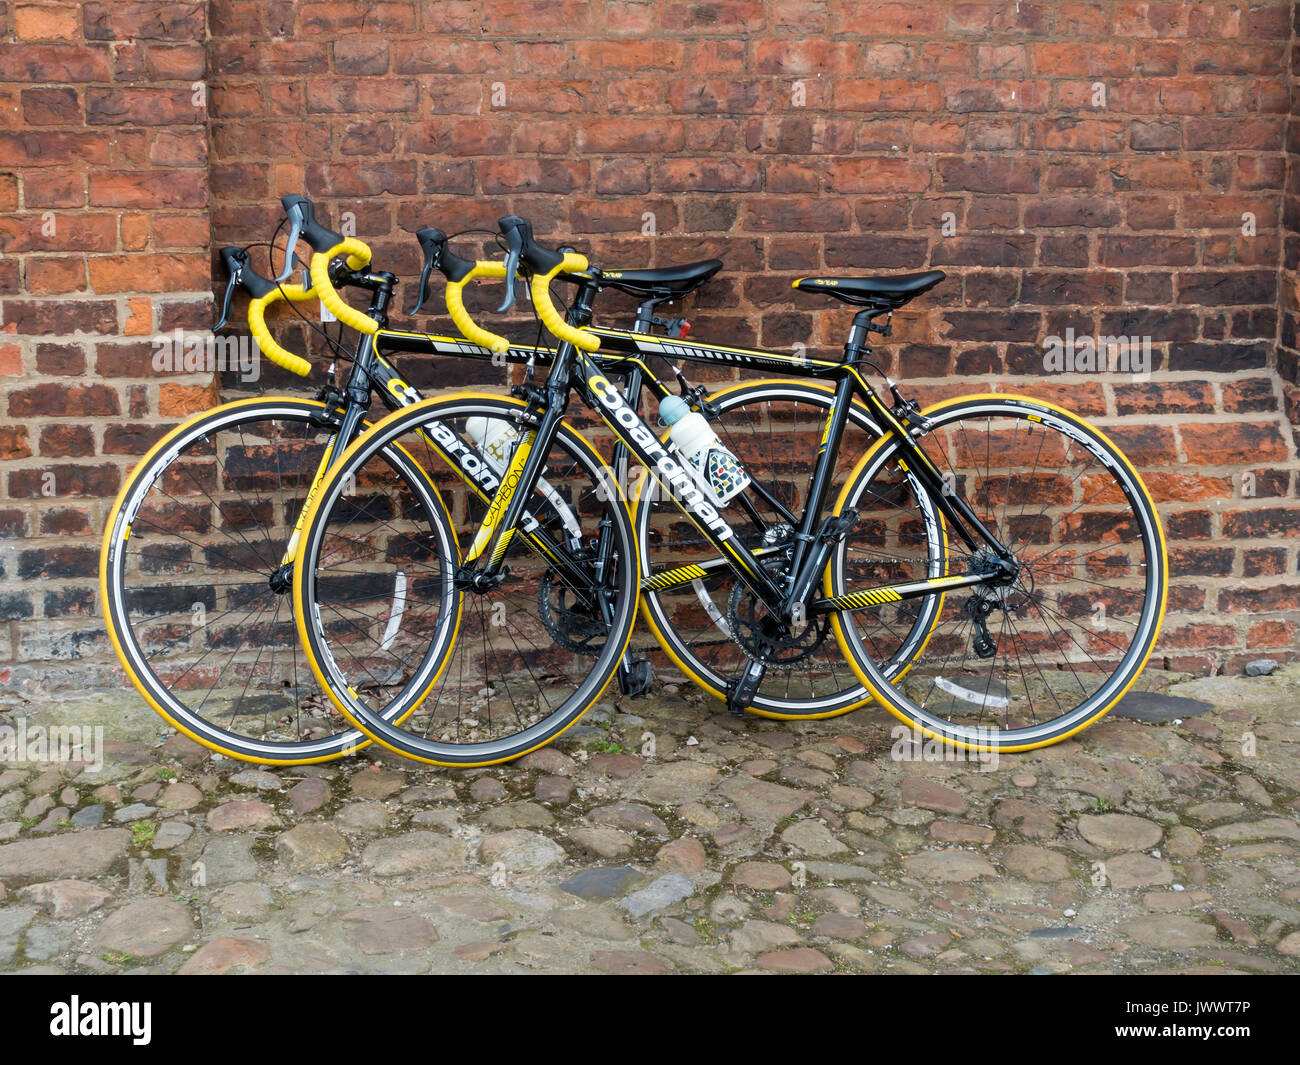 Two high quality black and yellow sports bicycles Boardman brand, parked against a brick wall while the riders are in a nearby café. Stock Photo